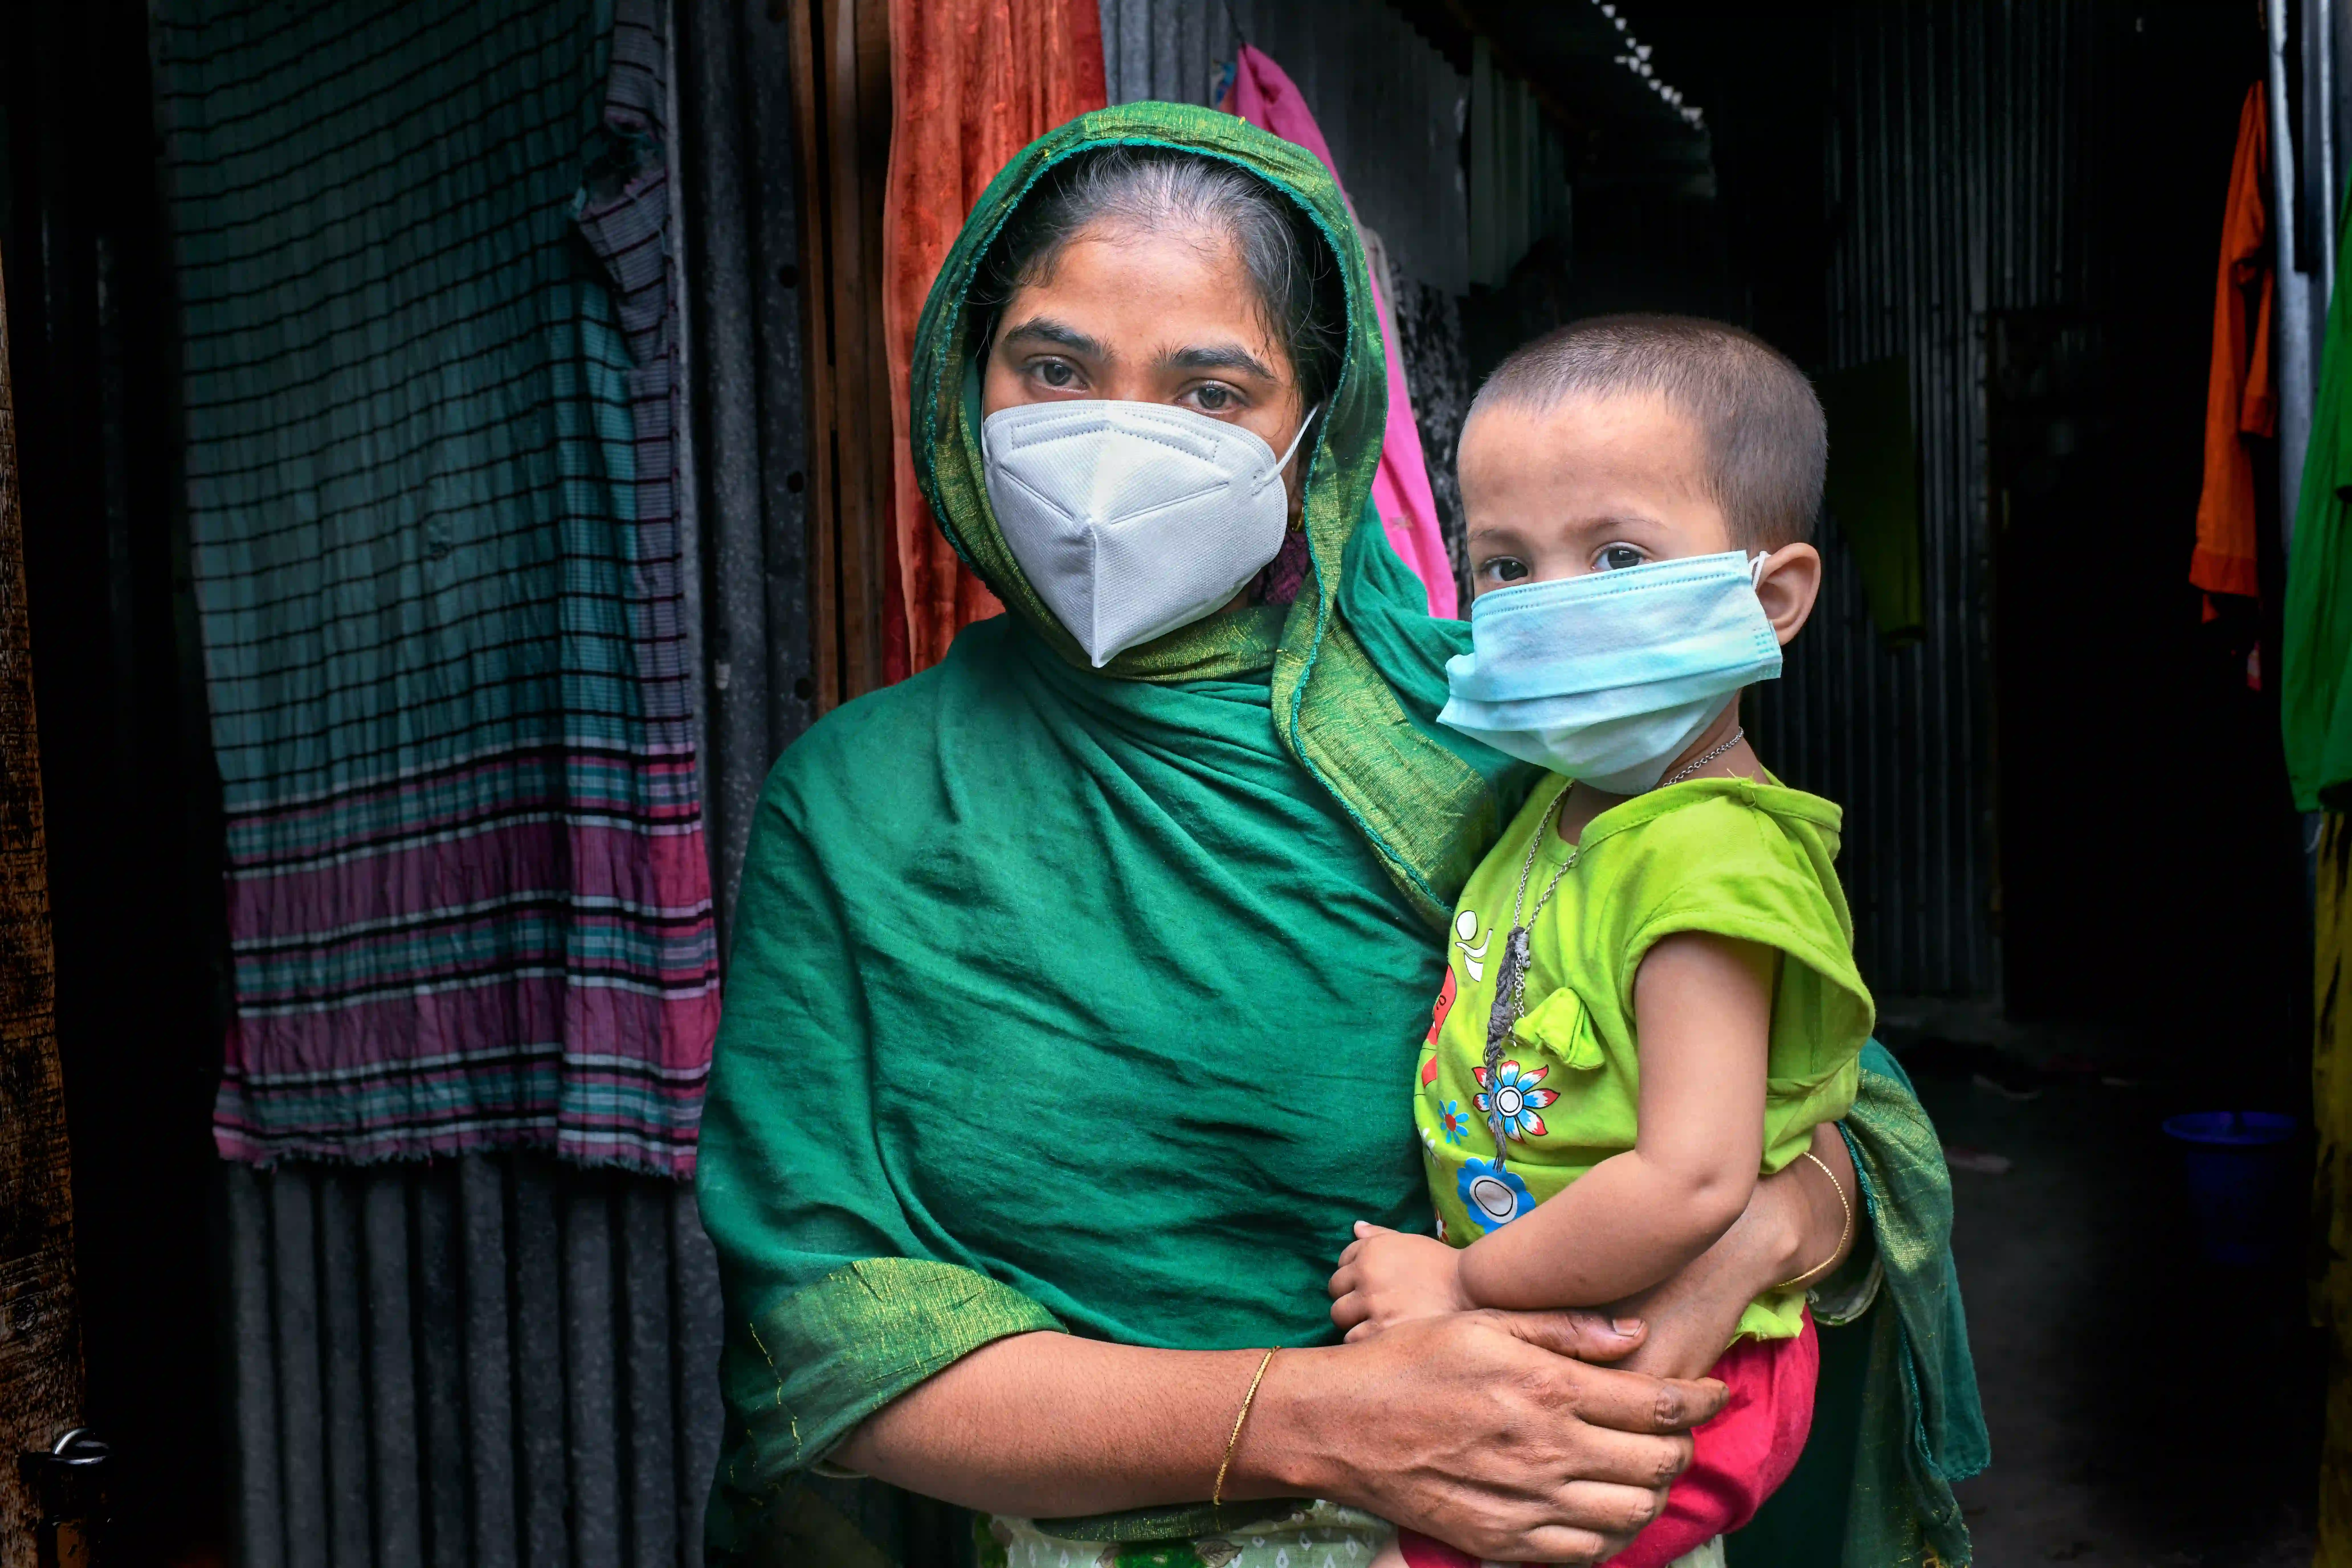 Woman and child in health masks